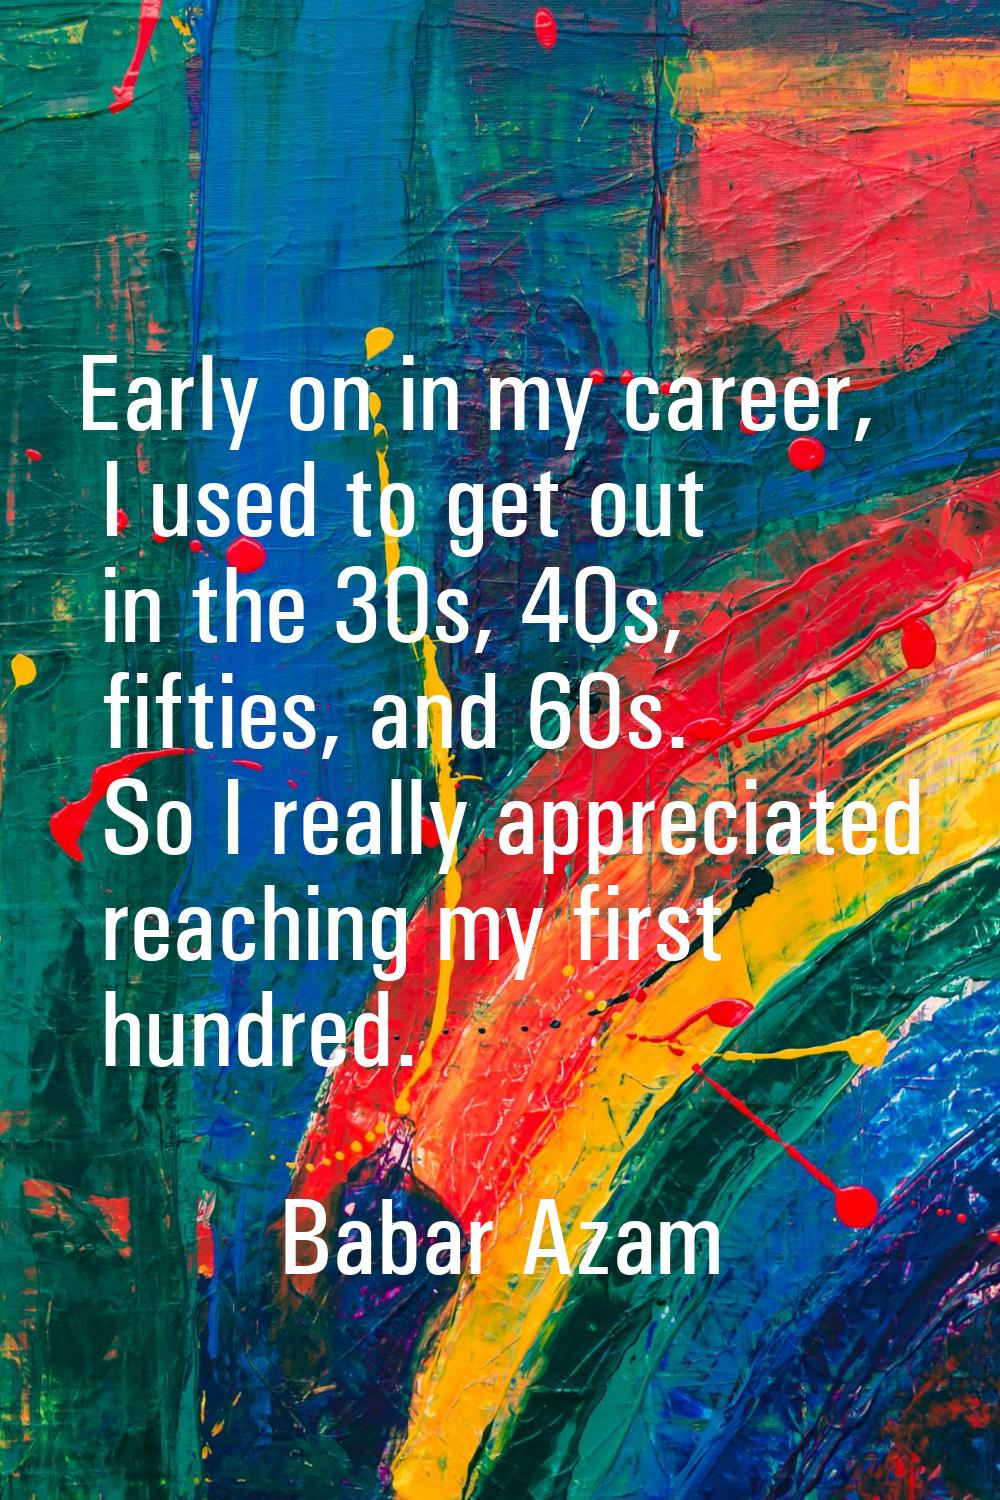 Early on in my career, I used to get out in the 30s, 40s, fifties, and 60s. So I really appreciated